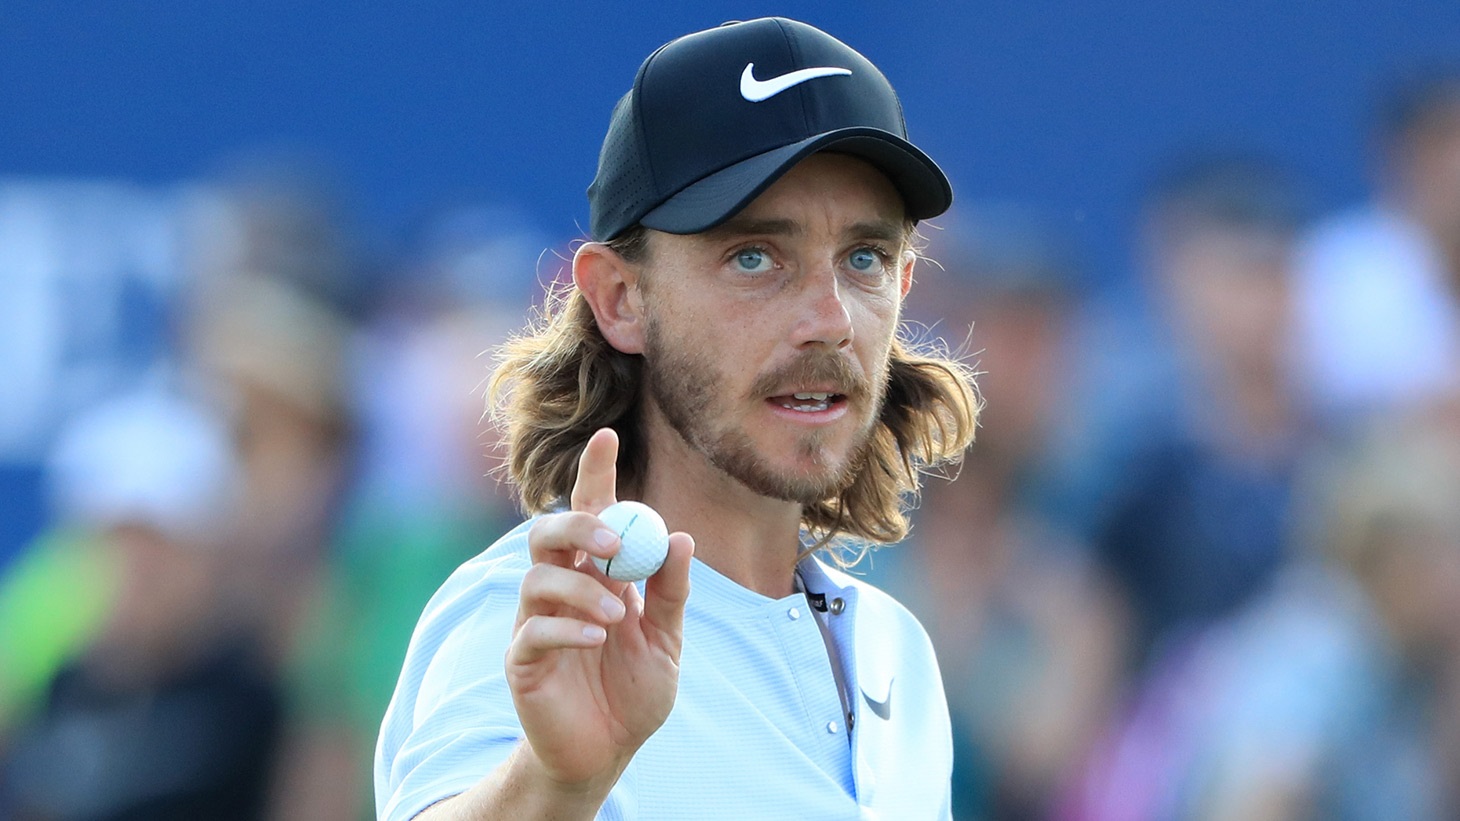 Tommy Fleetwood salutes the crowd with his Pro V1x golf ball at the 2018 Abu Dhabi Championship